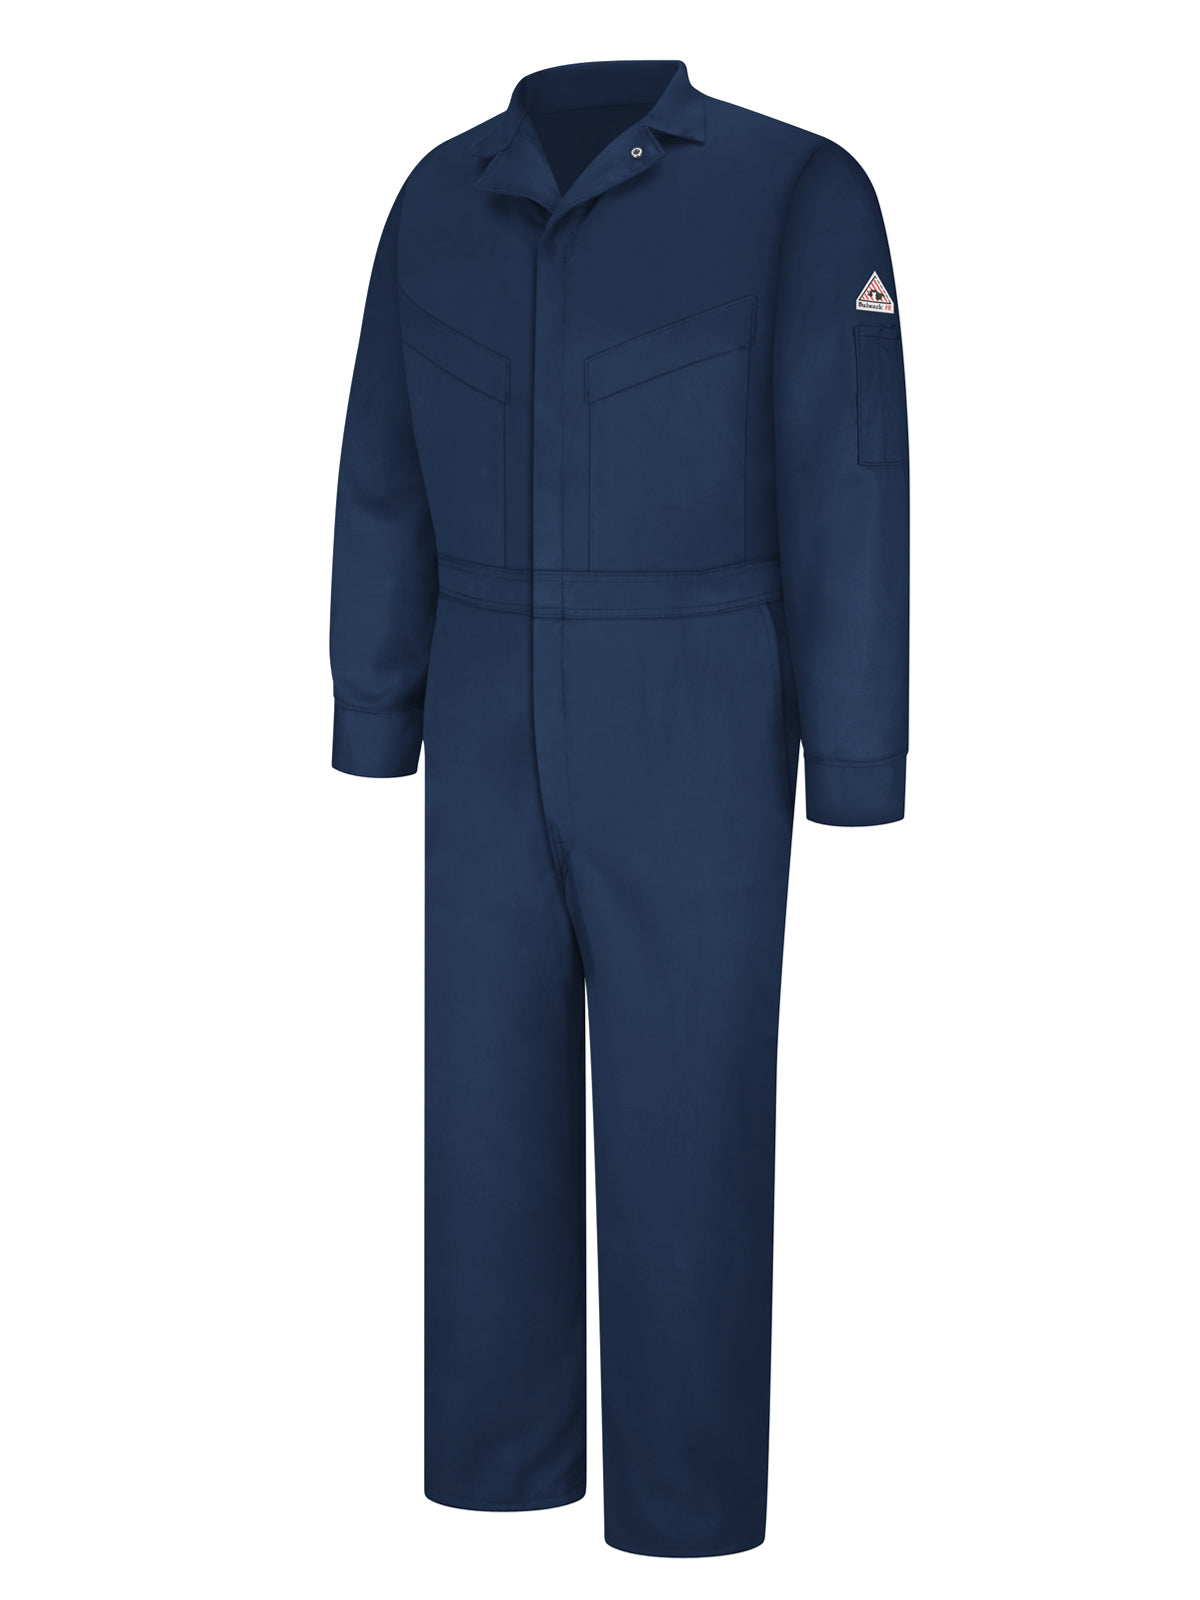 Men's Lightweight Excel Flame-Resistant Deluxe Coverall - CLD6 - Navy